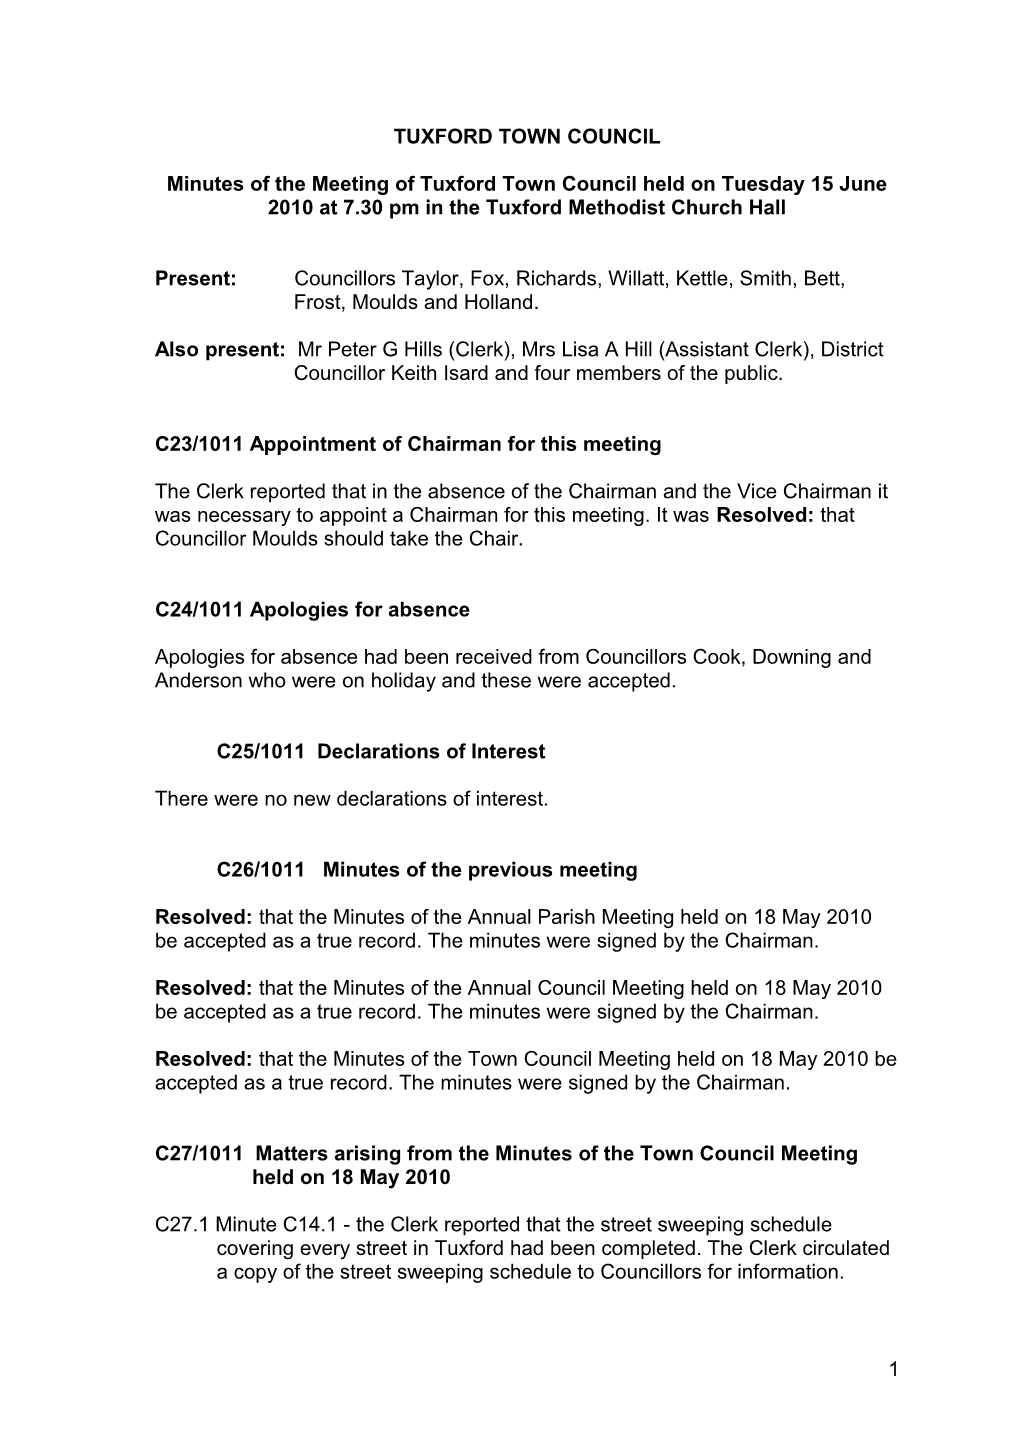 Minutes of the Meeting of Tuxford Parish Council Held on Tuesday 18 July 2006 at 7 s1